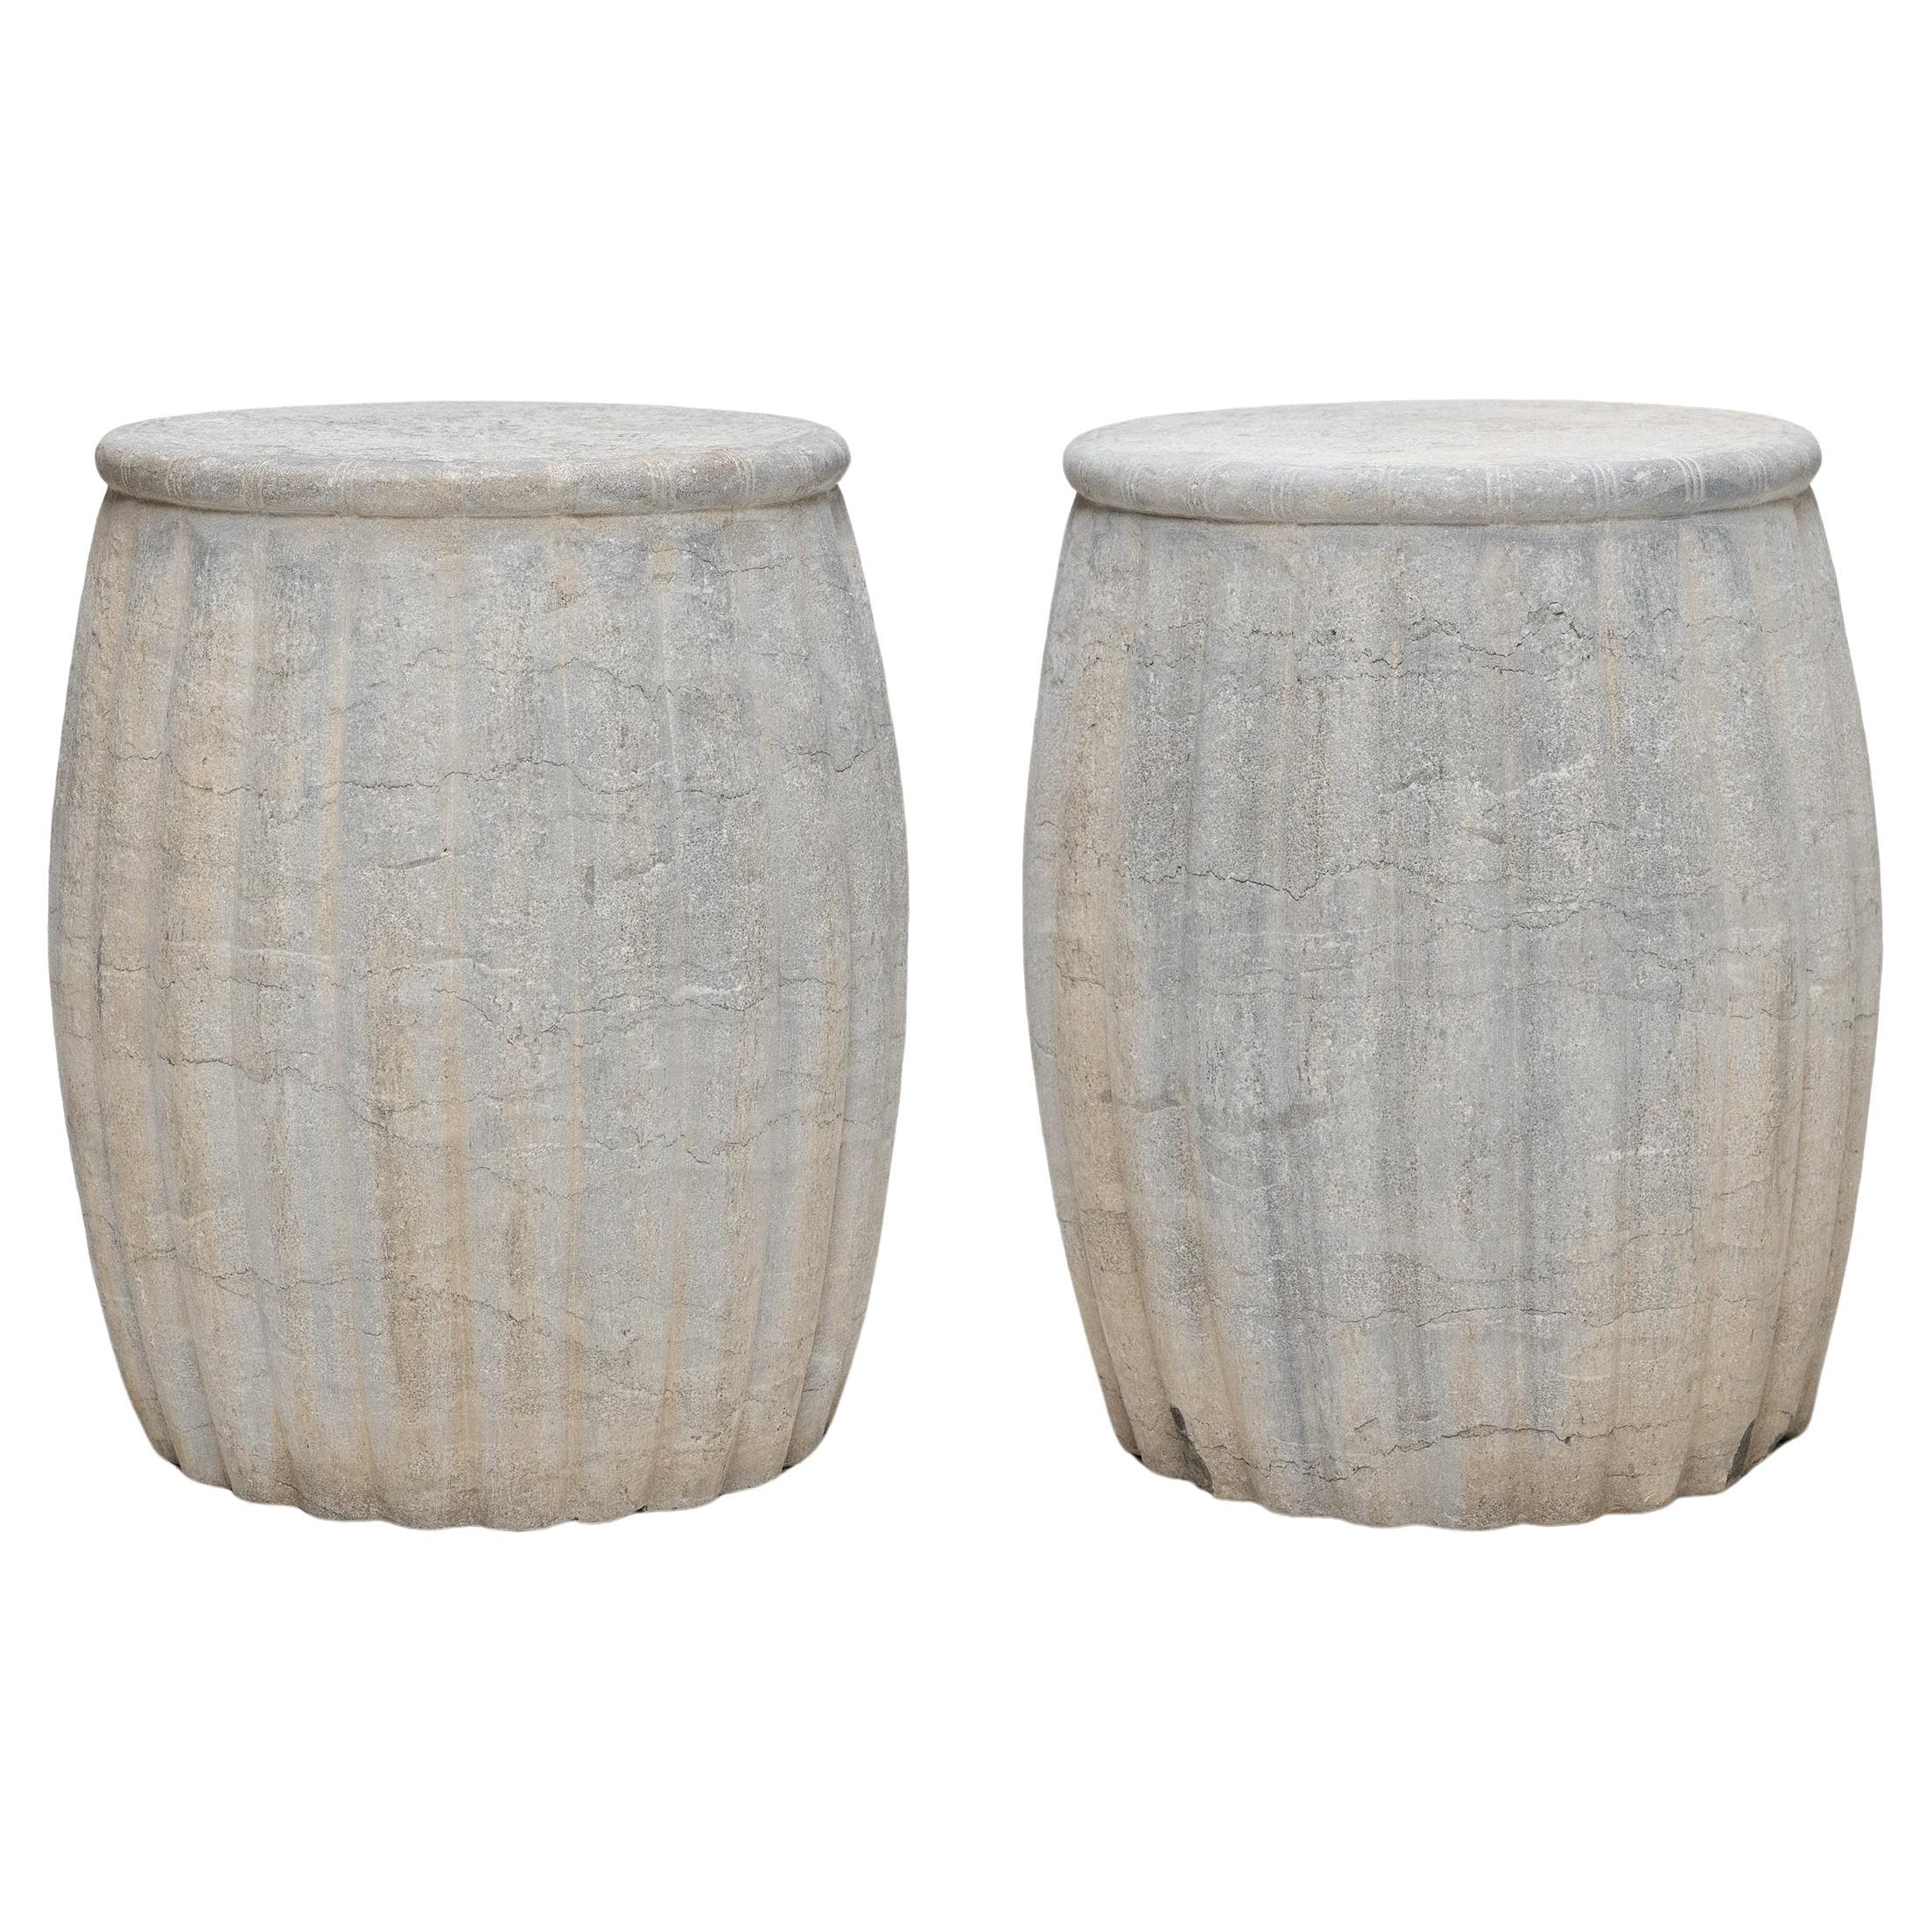 Pair of Chinese Melon Stone Drums